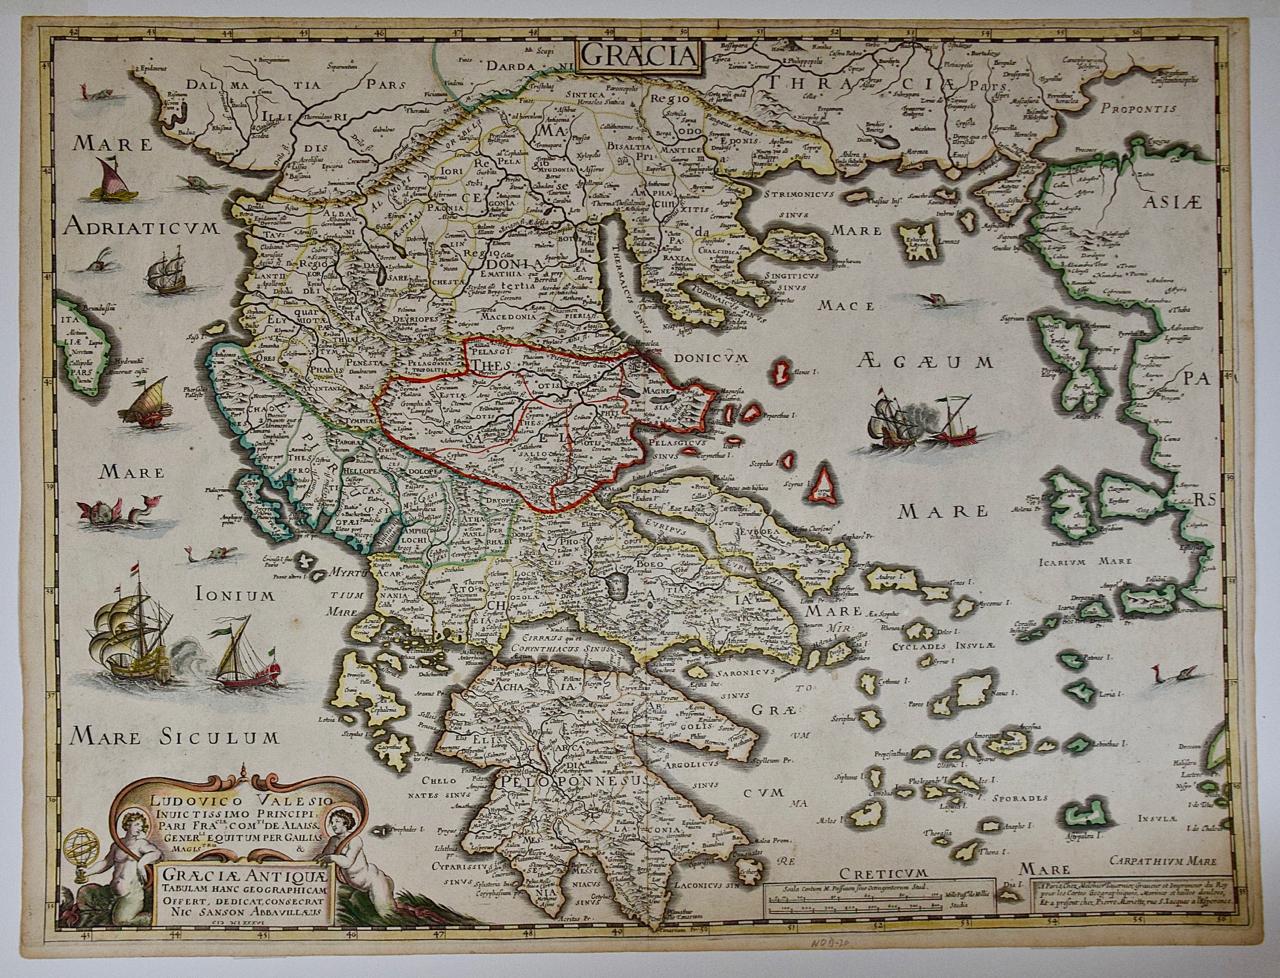 This is an original 17th century hand colored copperplate engraved map of Greece entitled 